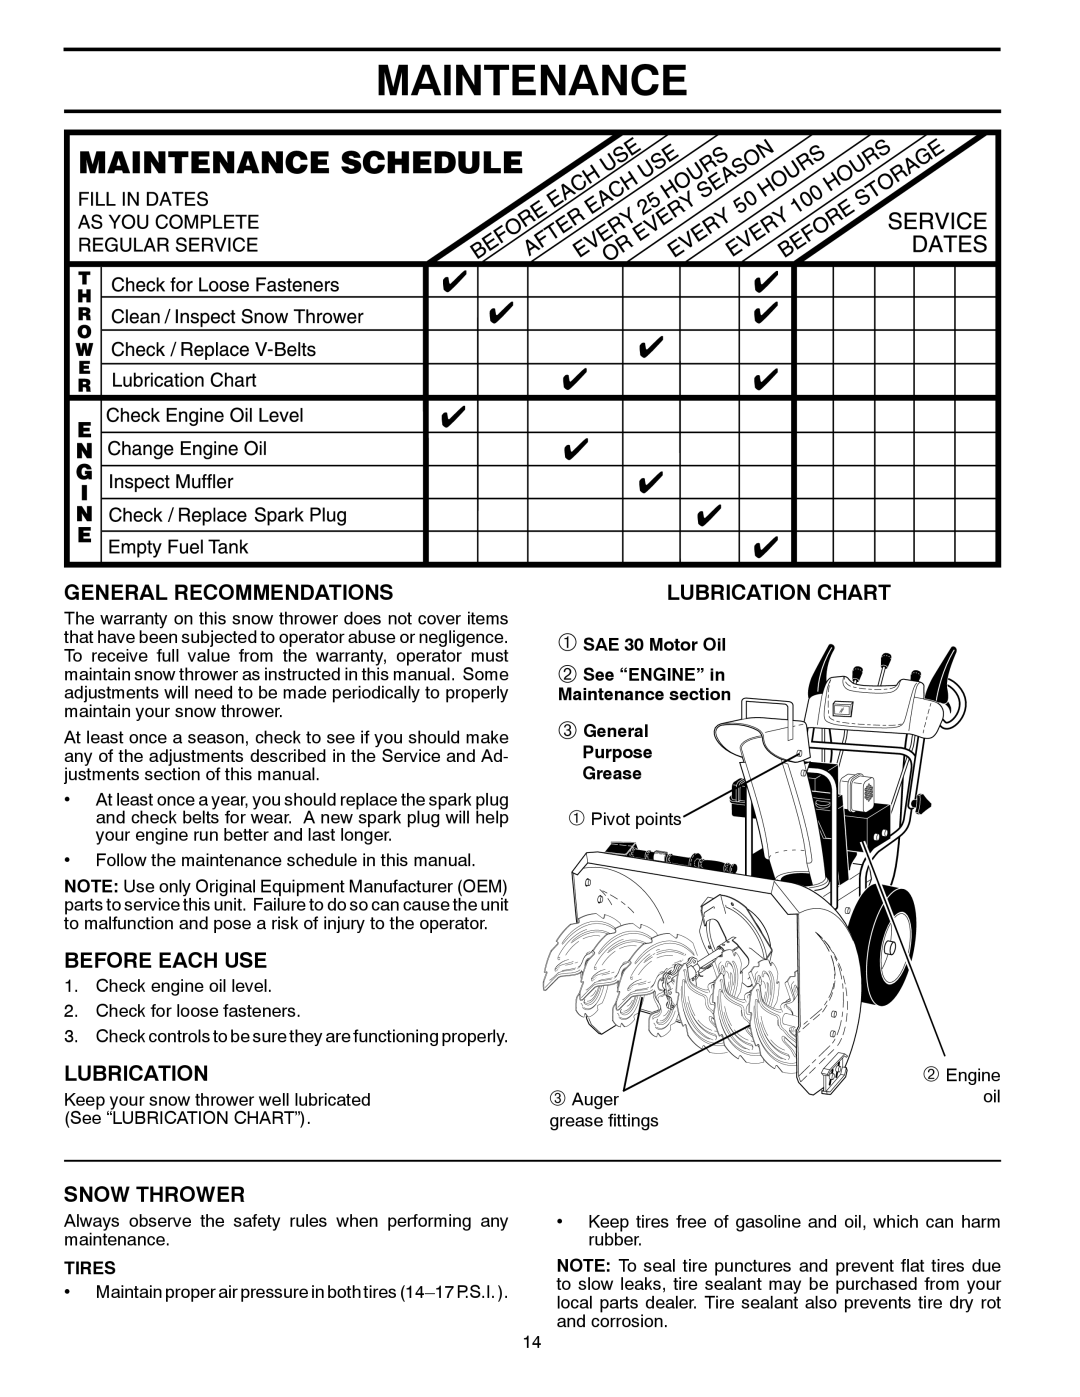 Husqvarna 1830HV manual Maintenance, General Recommendations, Before Each Use, Snow Thrower, Lubrication Chart, Tires 